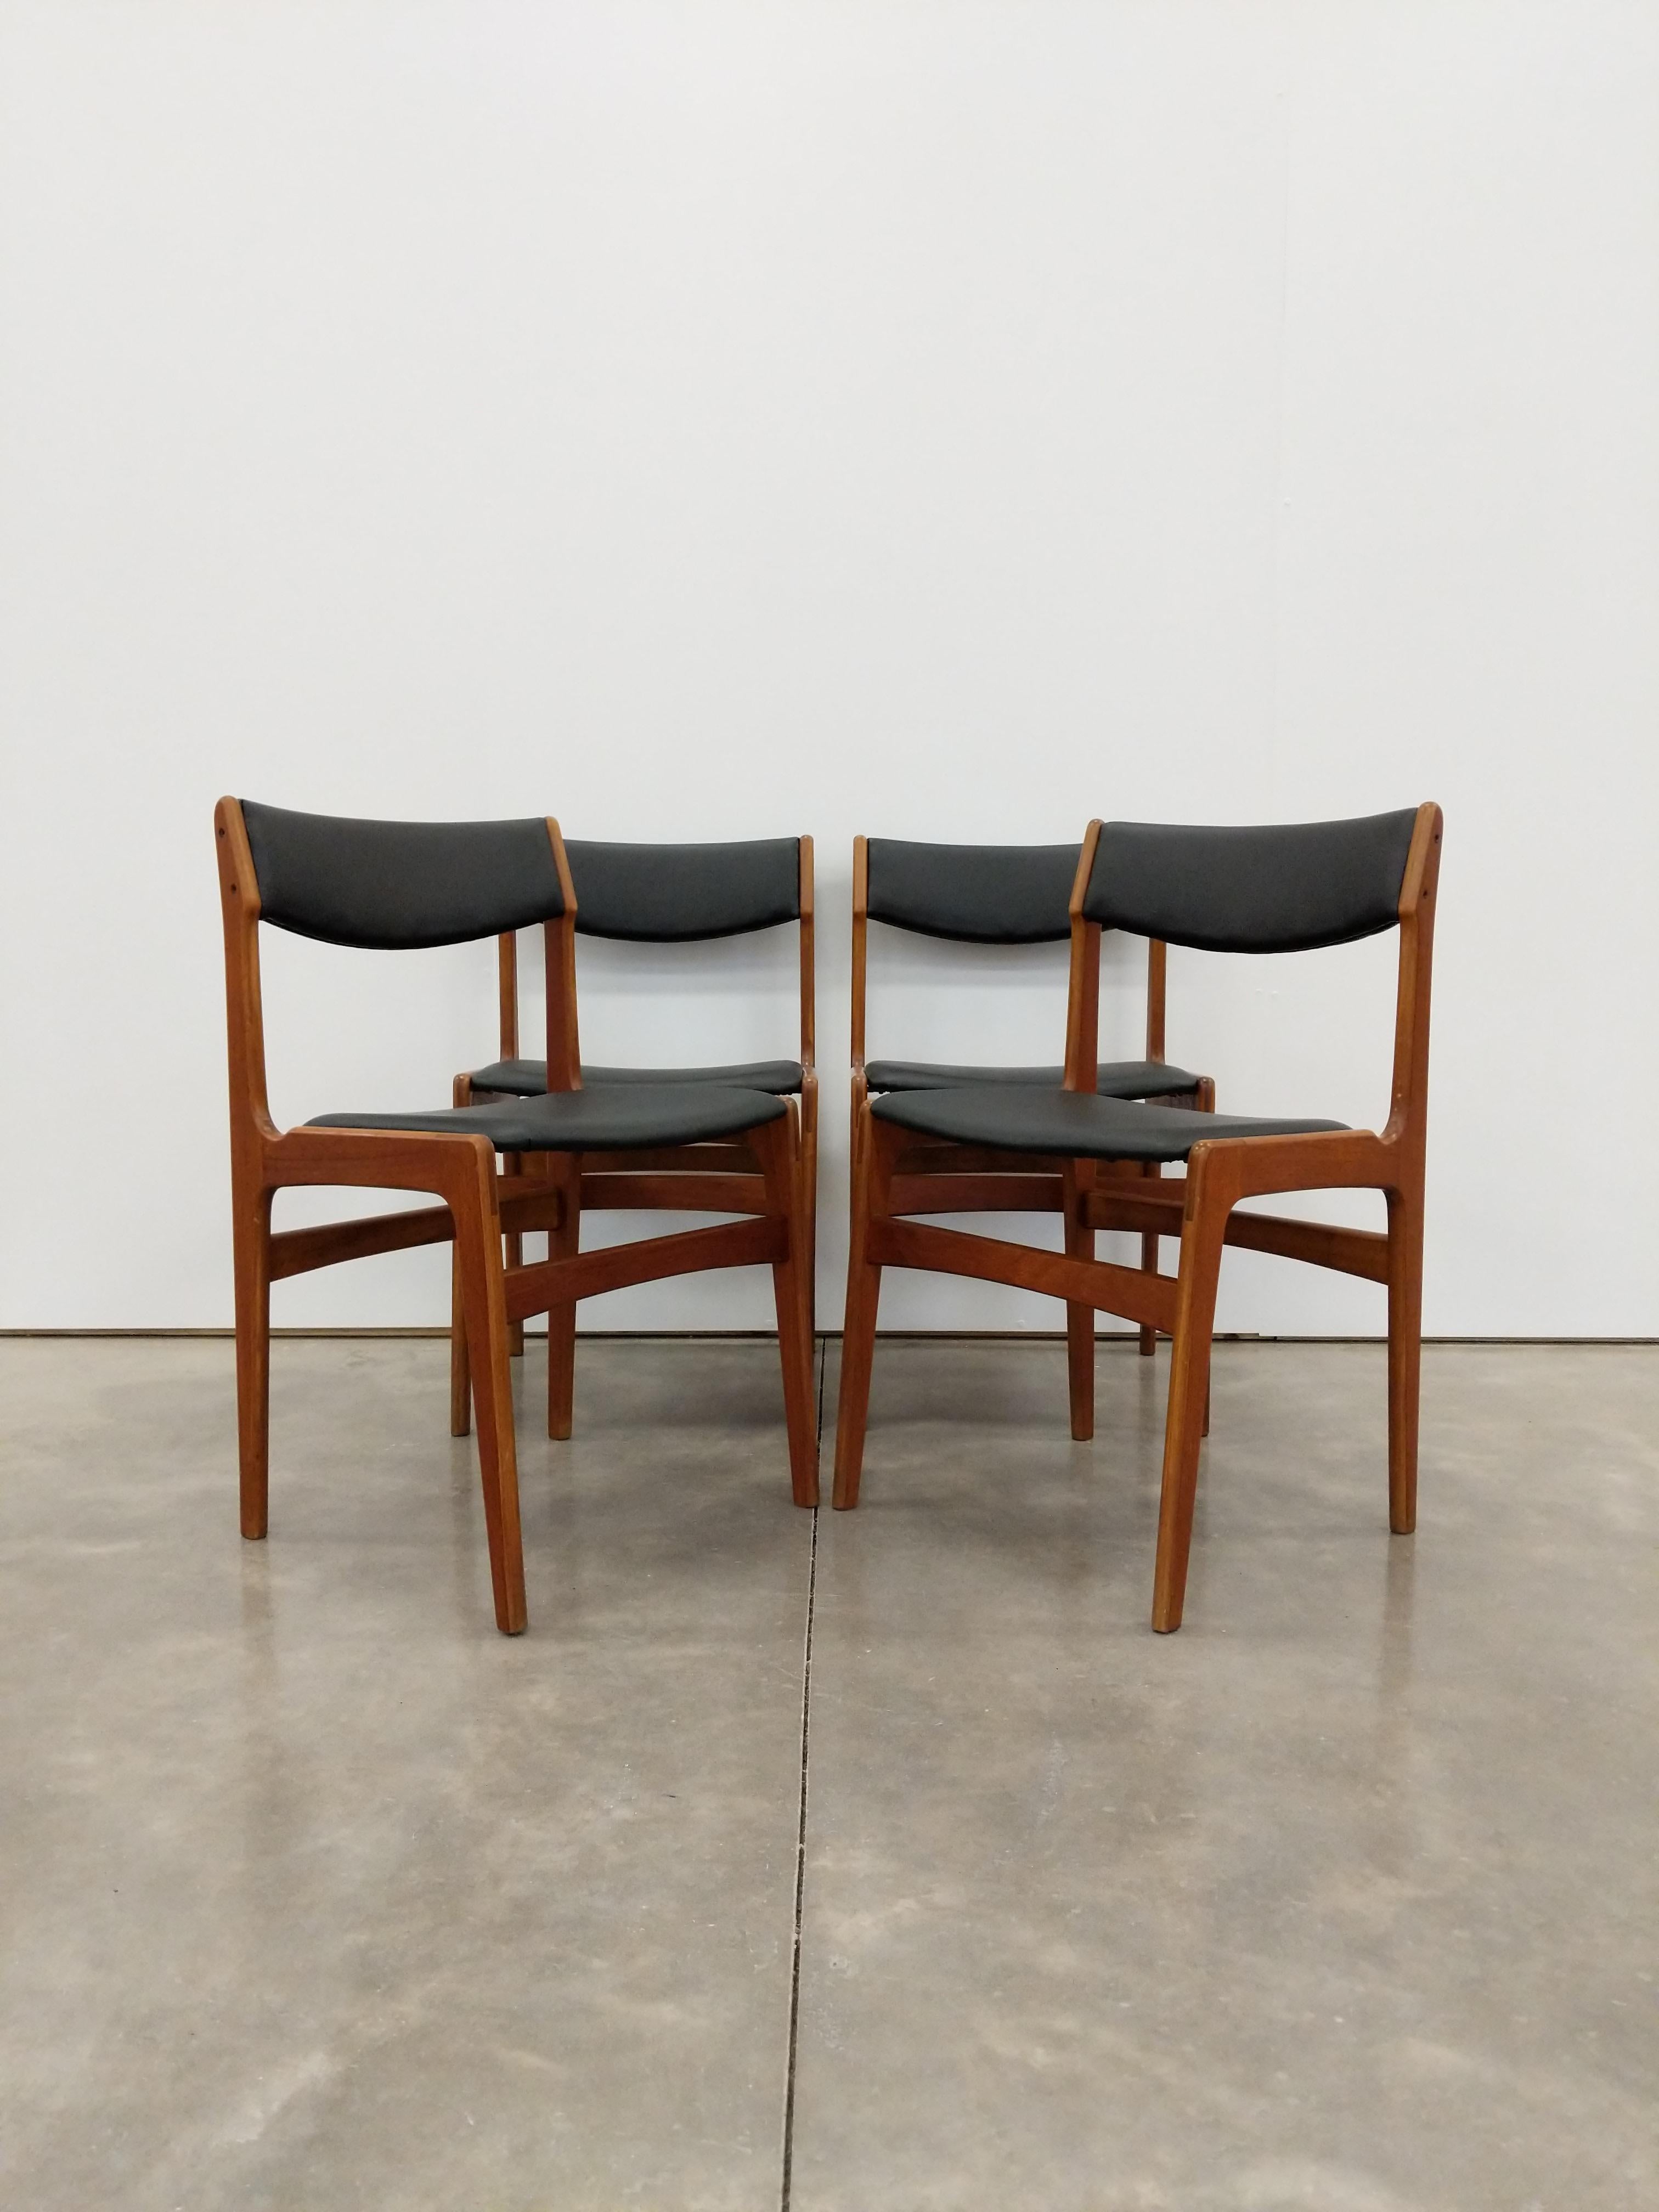 Set of 4 authentic vintage mid century Danish / Scandinavian Modern dining chairs.

This set is in excellent condition with brand new upholstery and very few signs of age-related wear (see photos).

If you would like any additional details, please